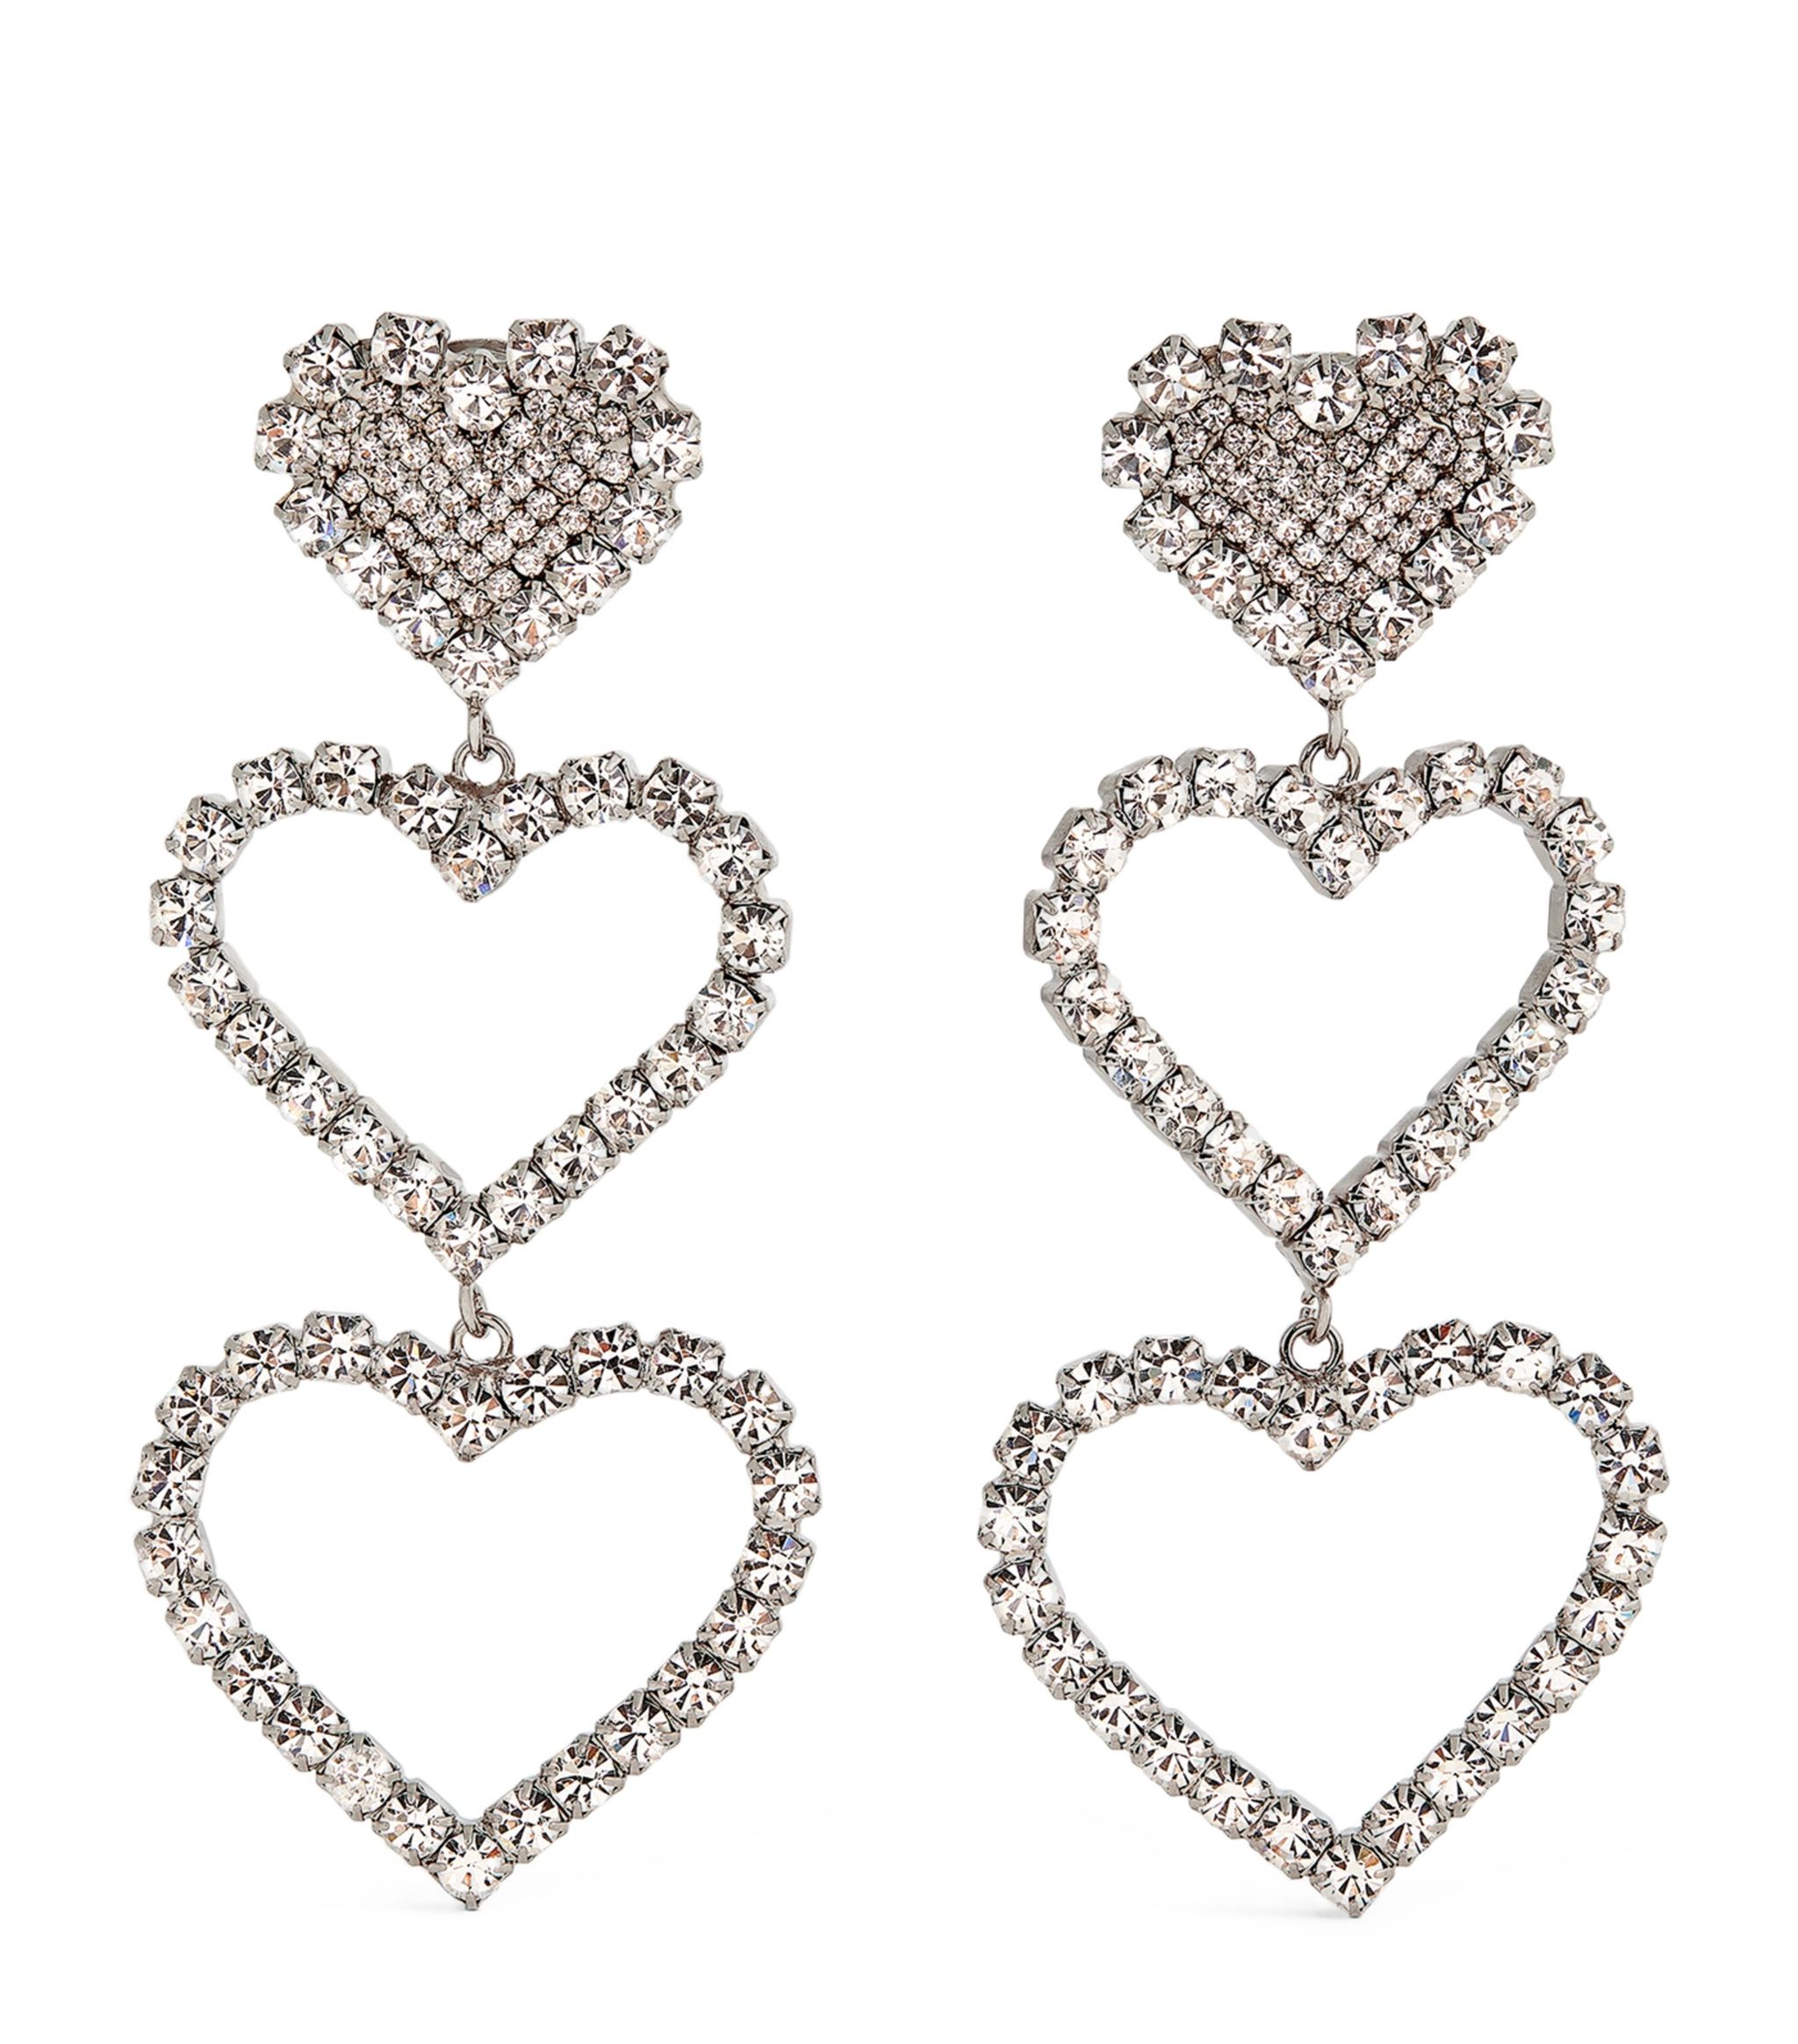 heart-shaped-jewellery-for-valentines-day-and-beyond-alessandra-rich